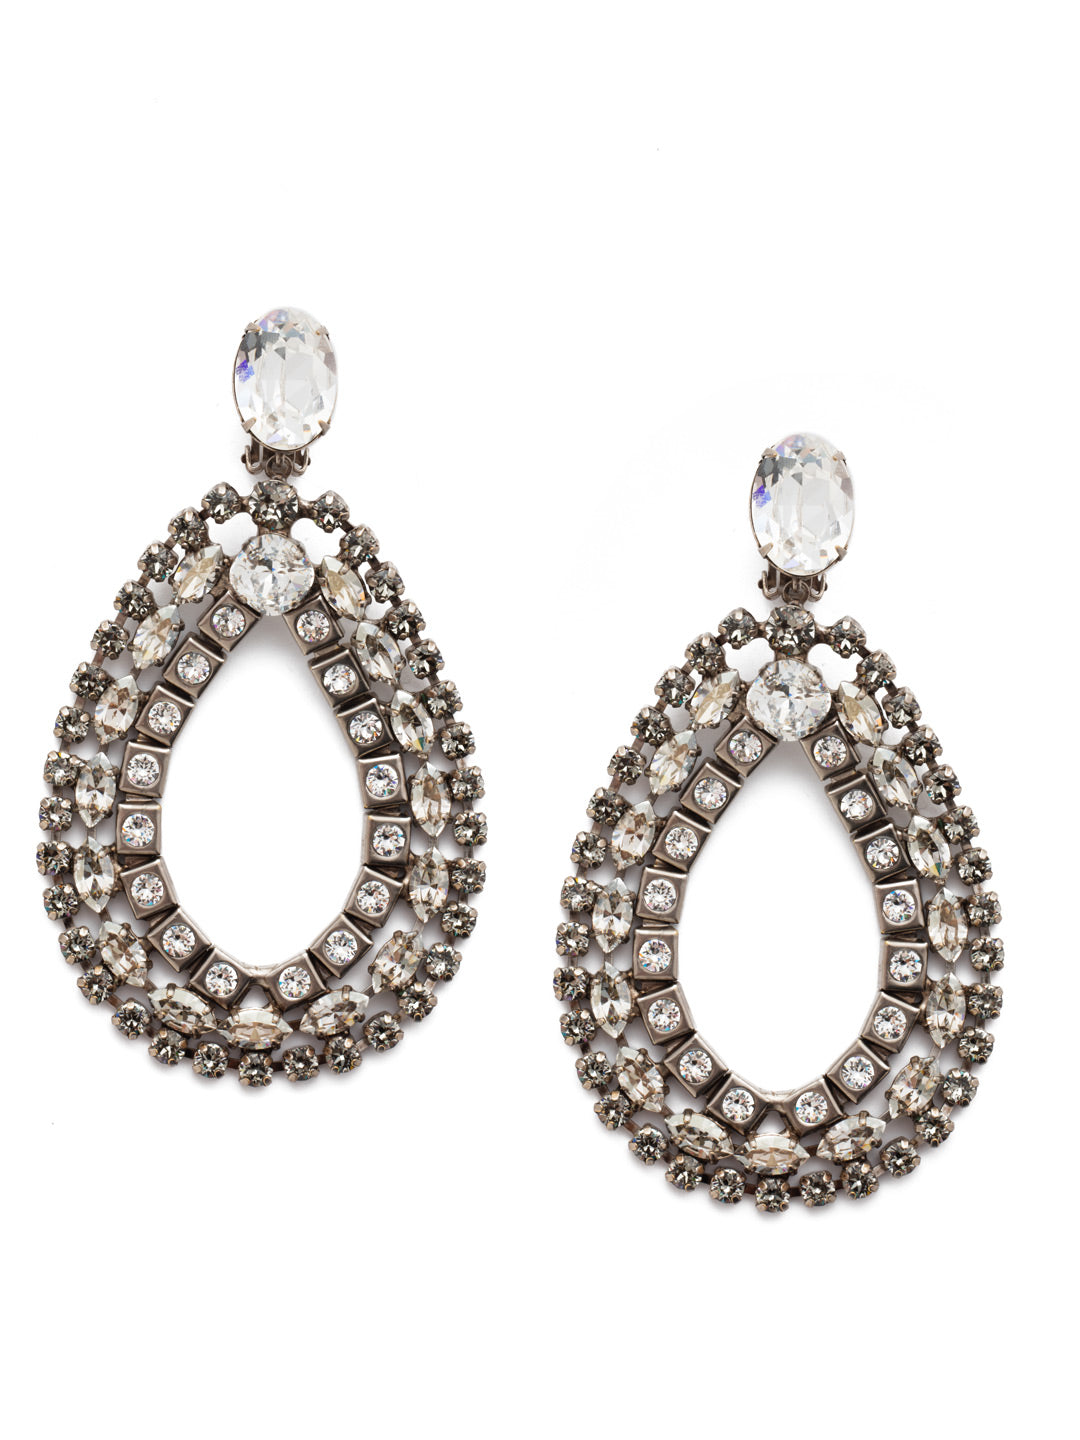 Alvian Statement Earrings - ESP74CASSSH - Looking for a perfect statement clip-op? Well look no further. The Alvian Statement Earrings dangle beautifully from an oval crystal. The layered design will be anything but subtle. From Sorrelli's Silver Shade collection in our Antique Silver-tone finish.